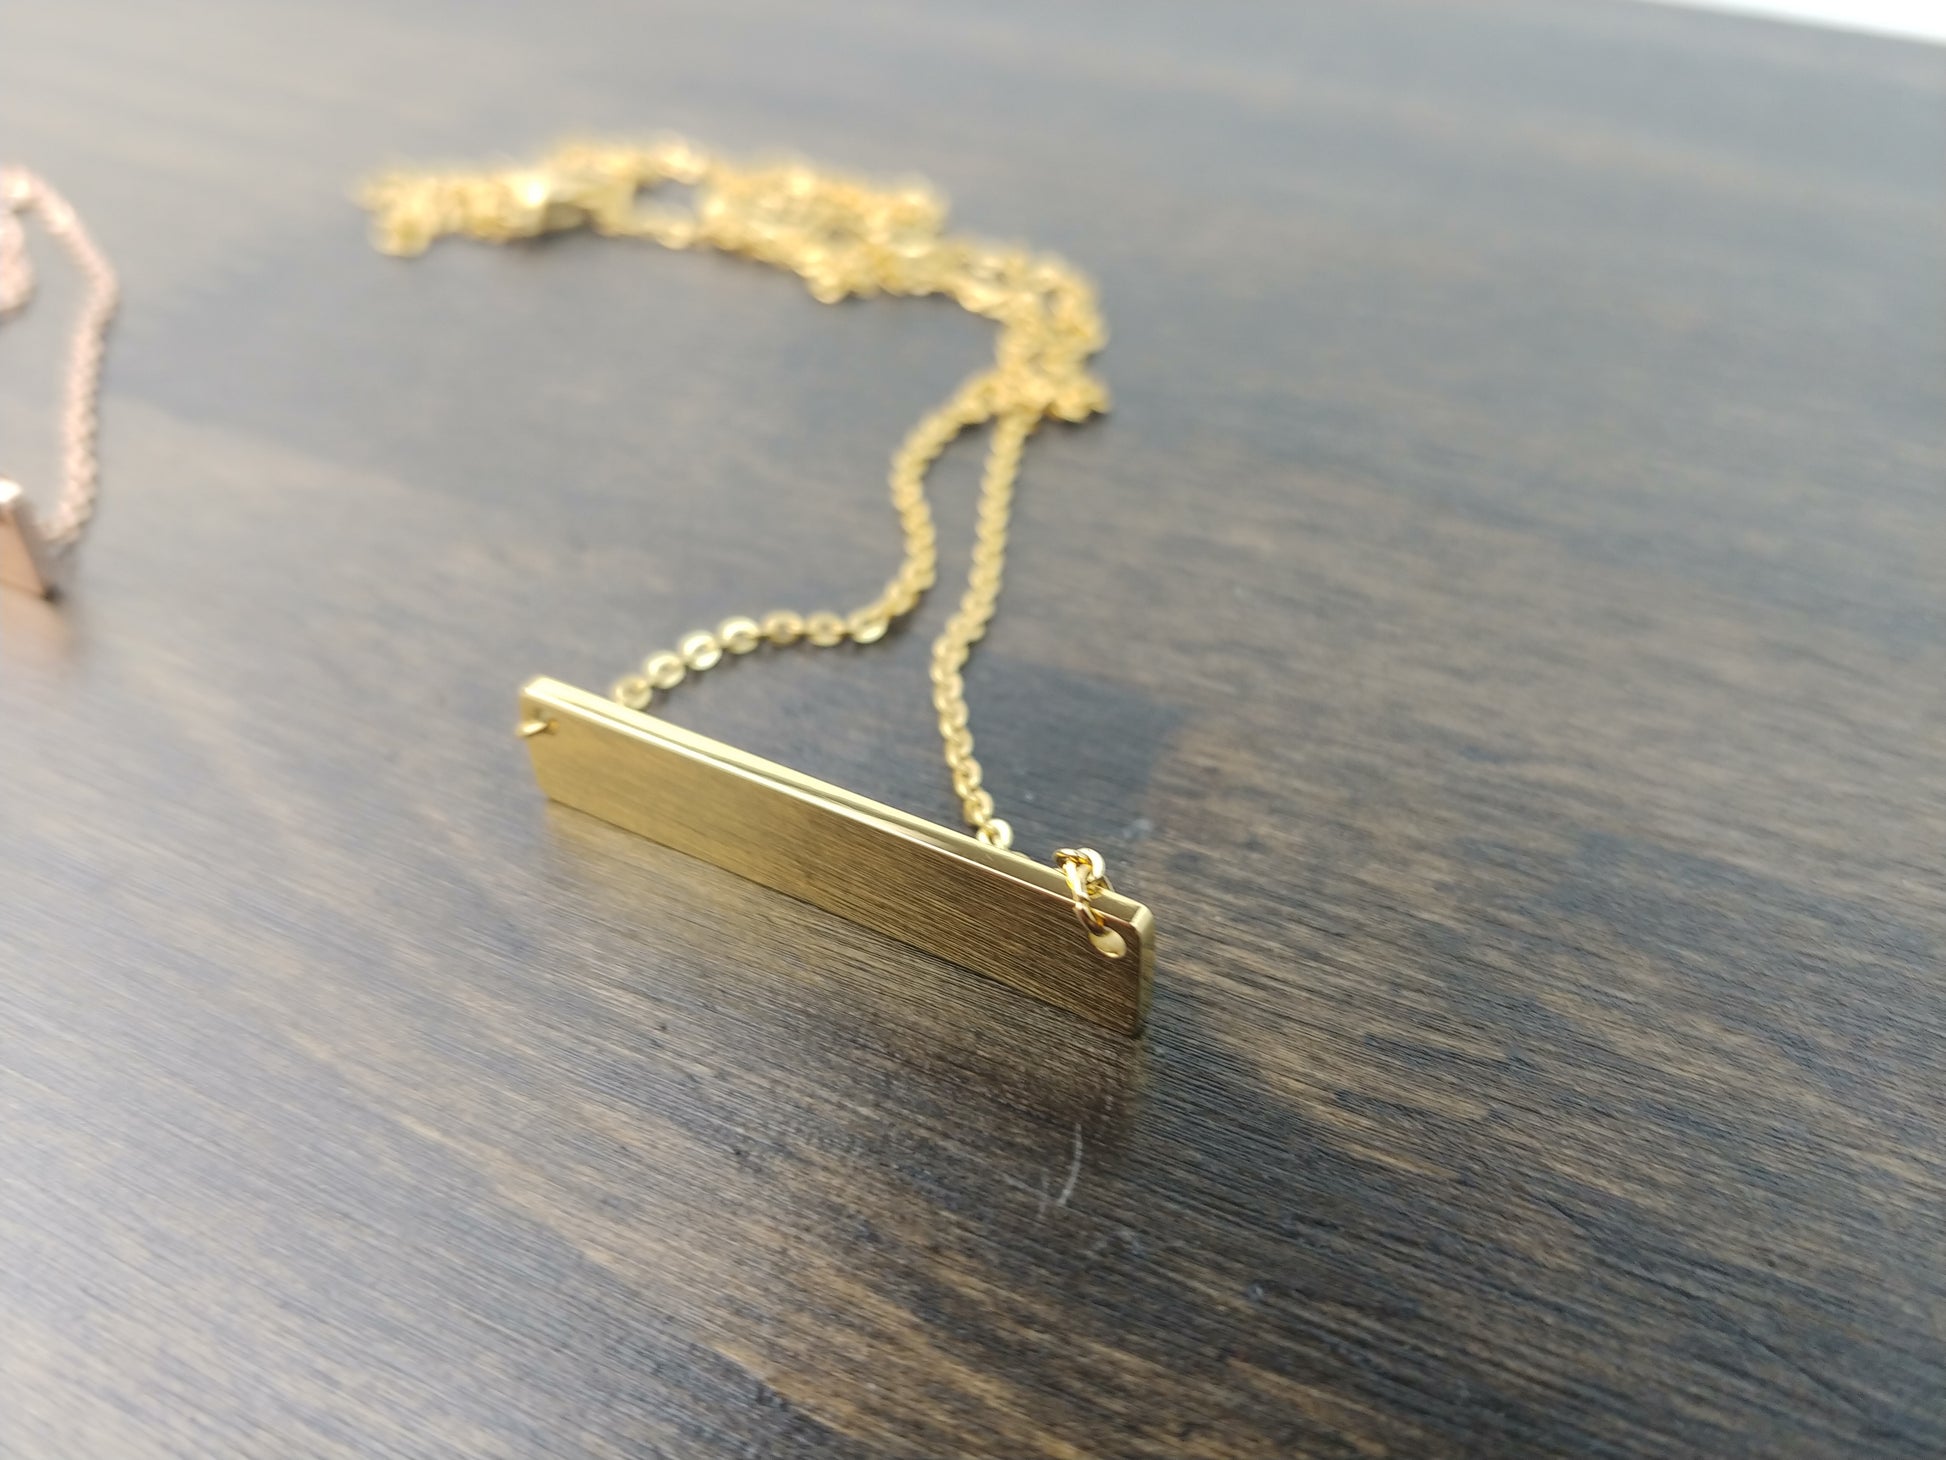 Gold Bar Necklace - DreamWood Rings Supplies